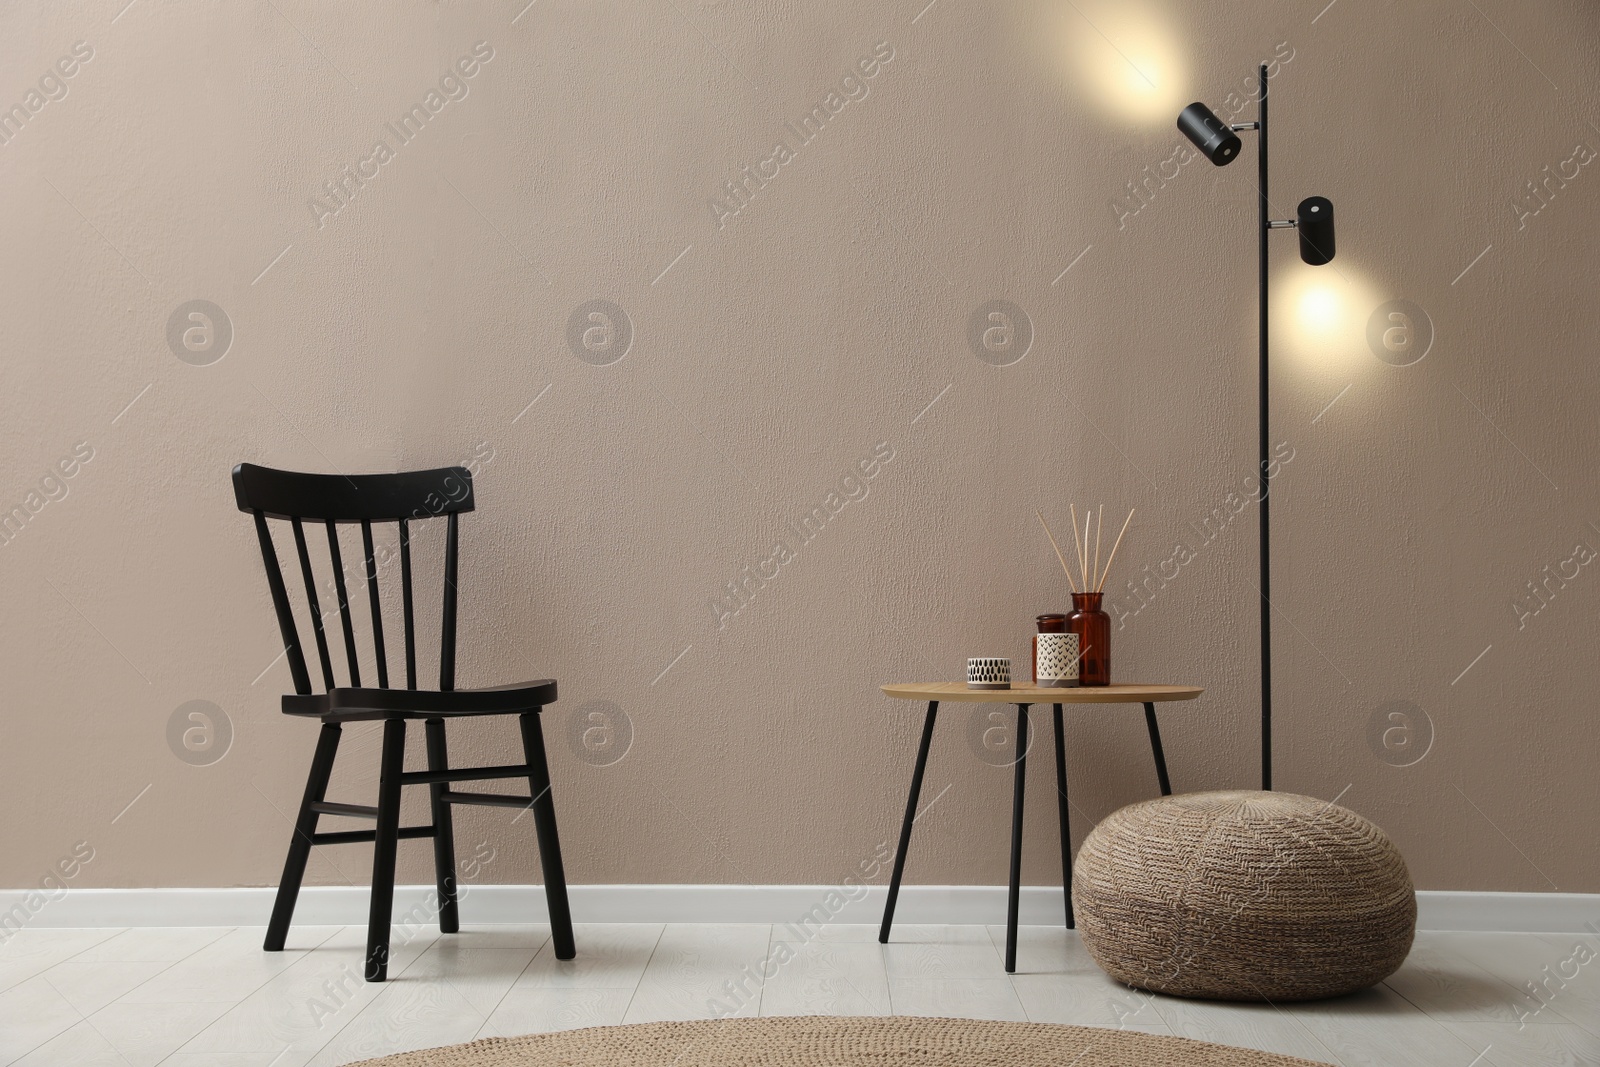 Photo of Stylish room interior with pouf, chair and decor elements